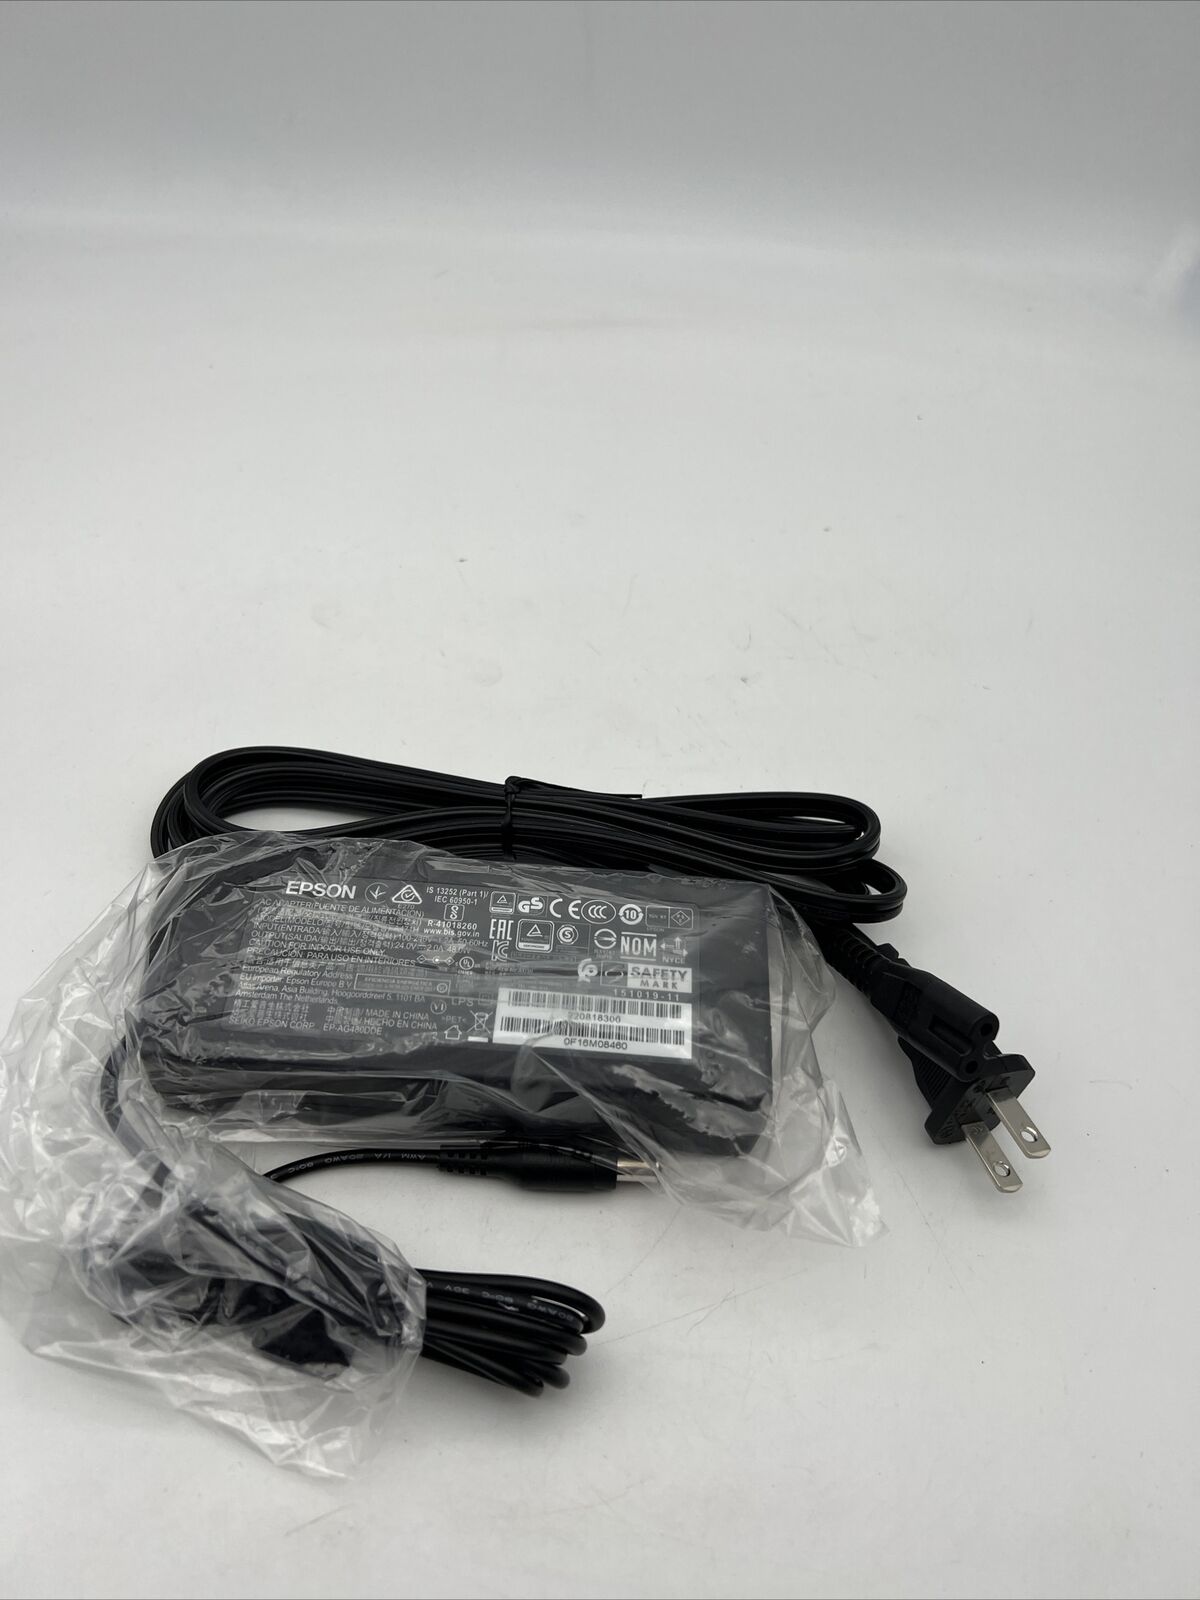 Epson A471H 24V 2A 48W Power Supply Adapter Brand: Epson Compatible Brand: For Epson Type: Power Supplies & Batteri